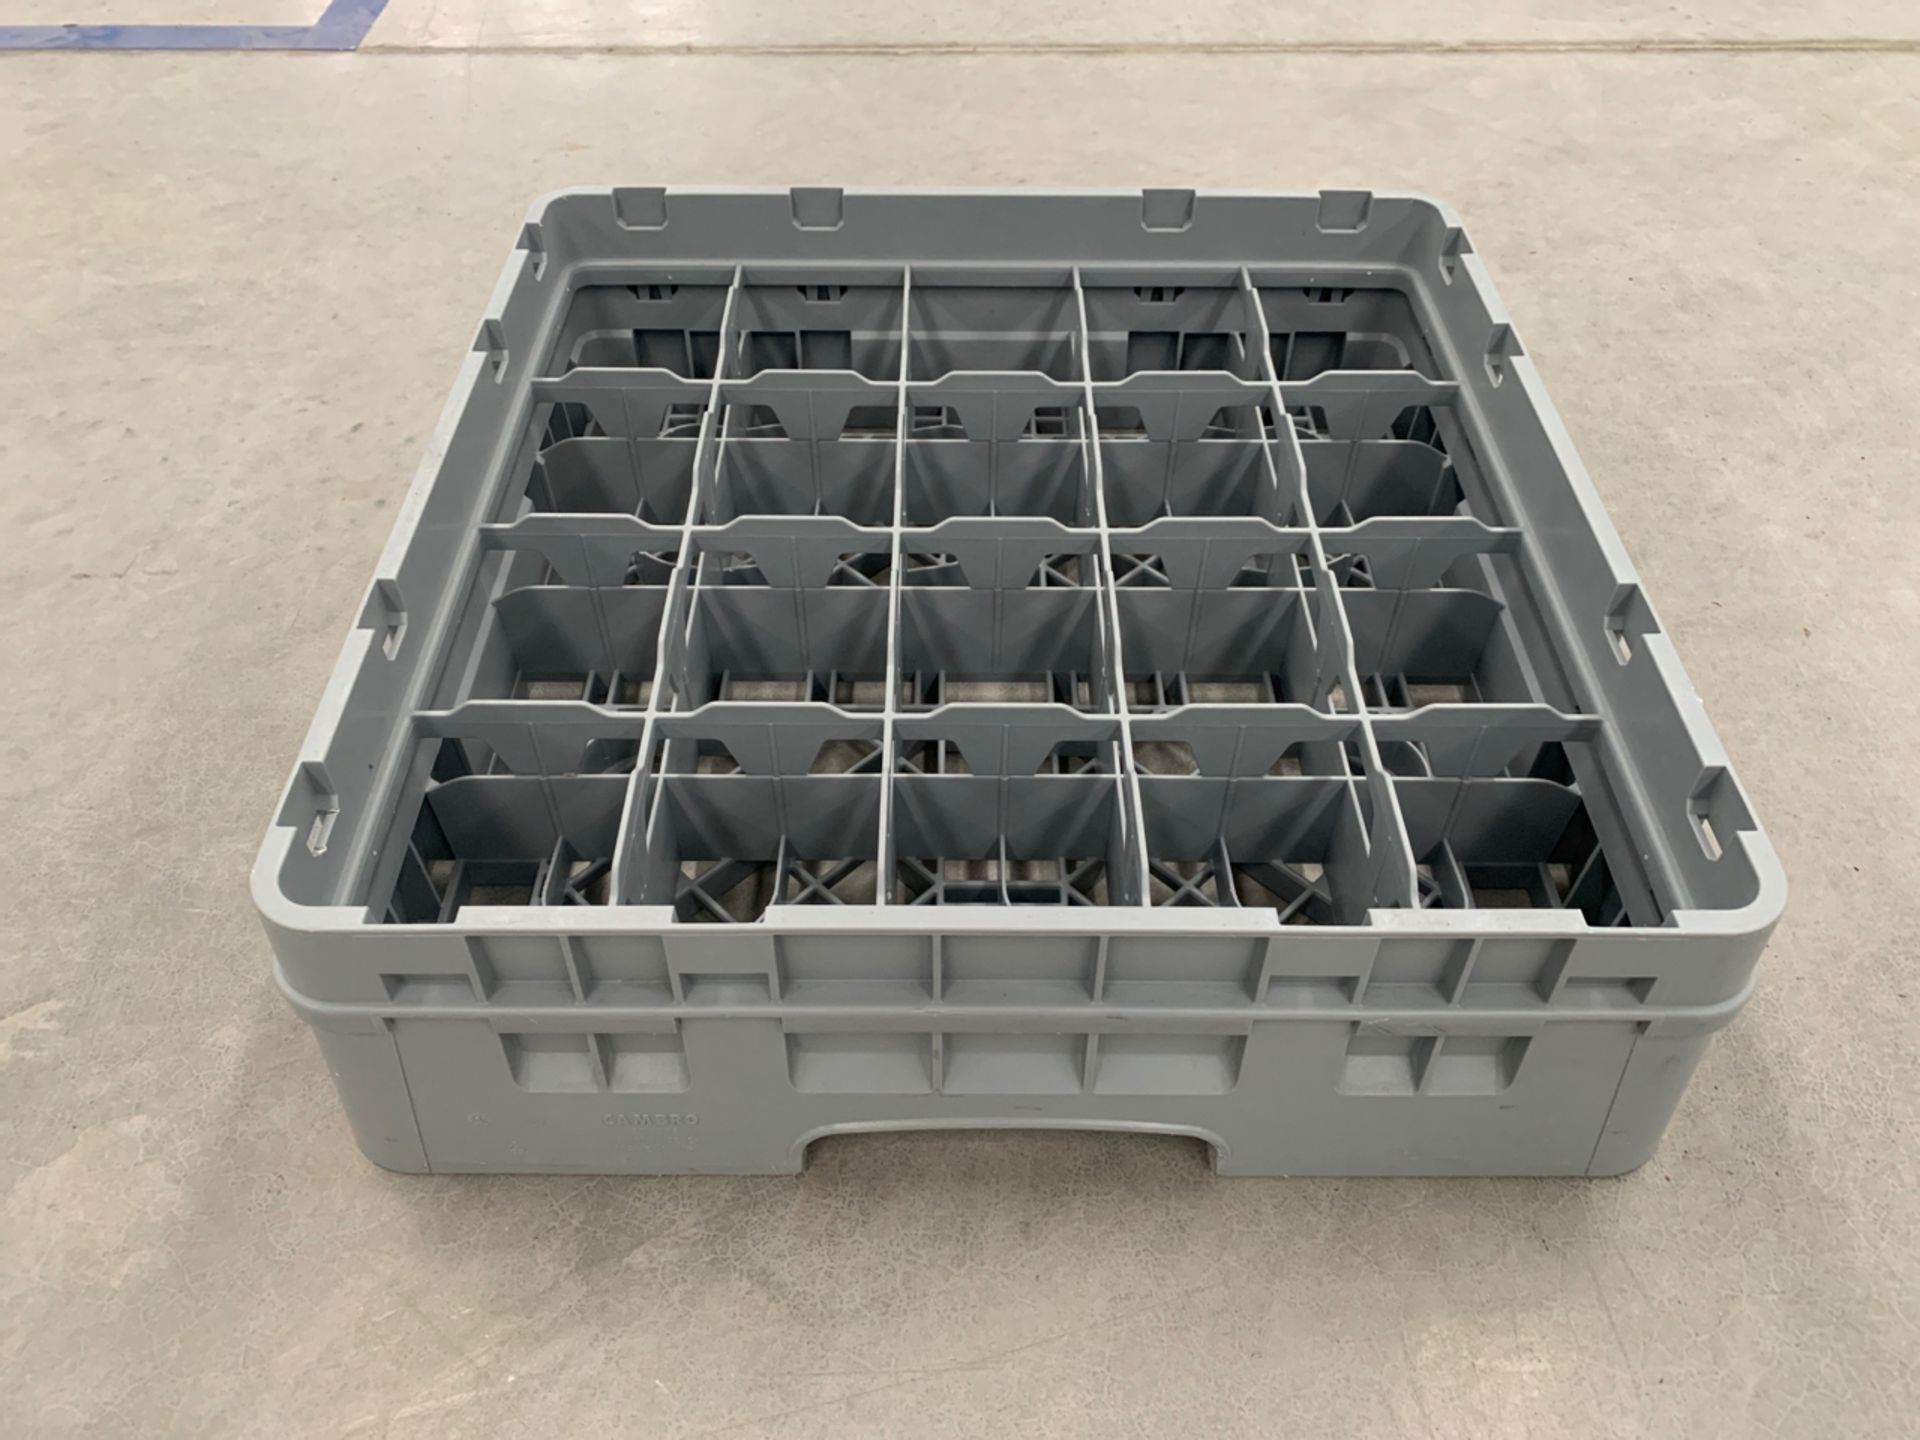 Cambro Camrack Glass Rack 25 Compartments Max Glass Height 92mm